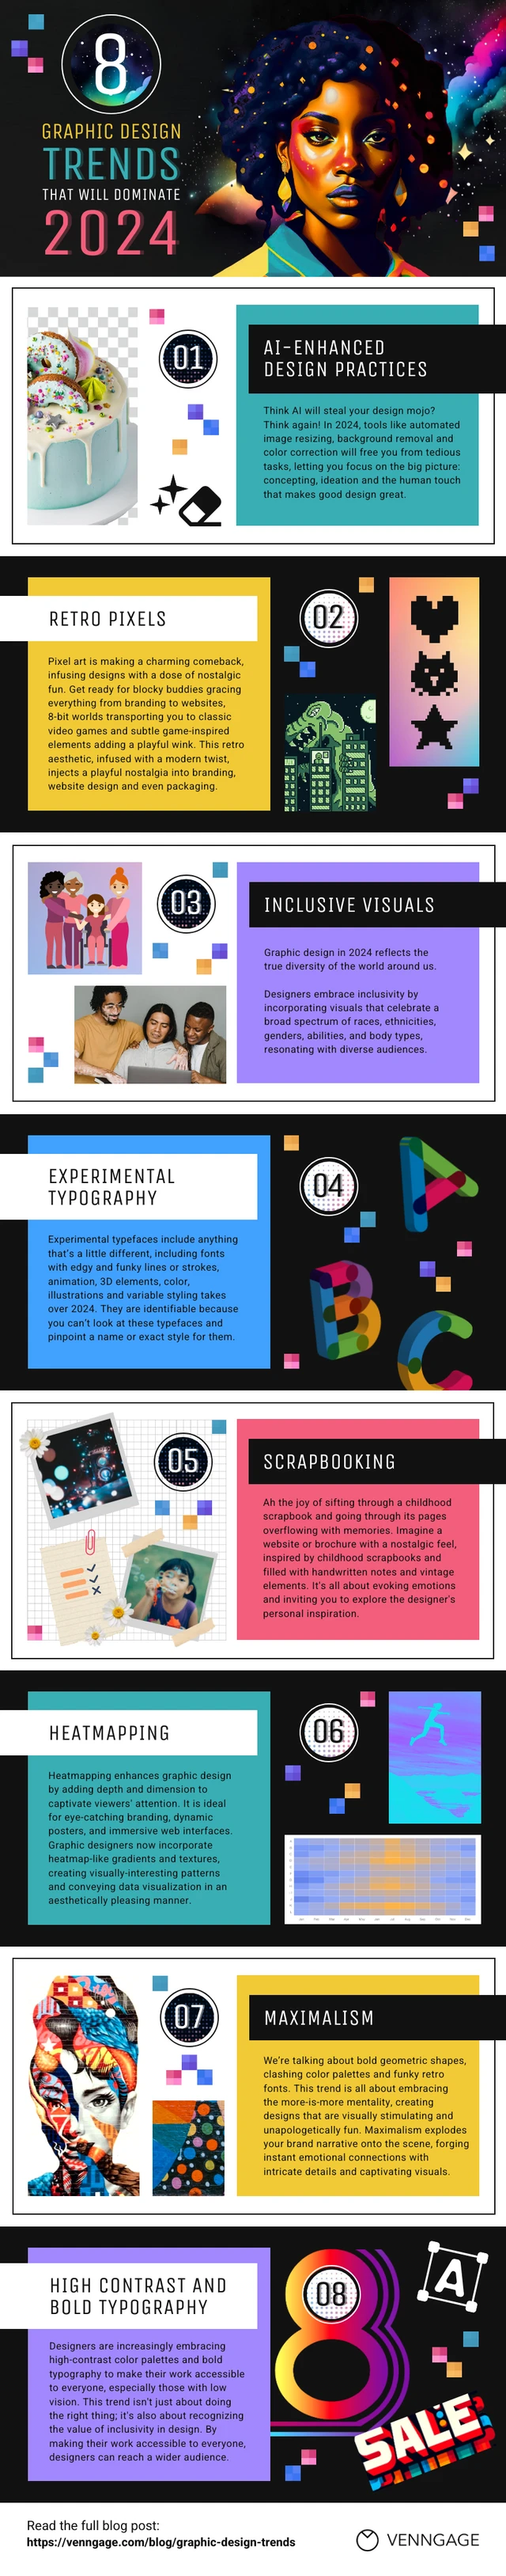 Graphic Design Trends 2024 Infographic Template